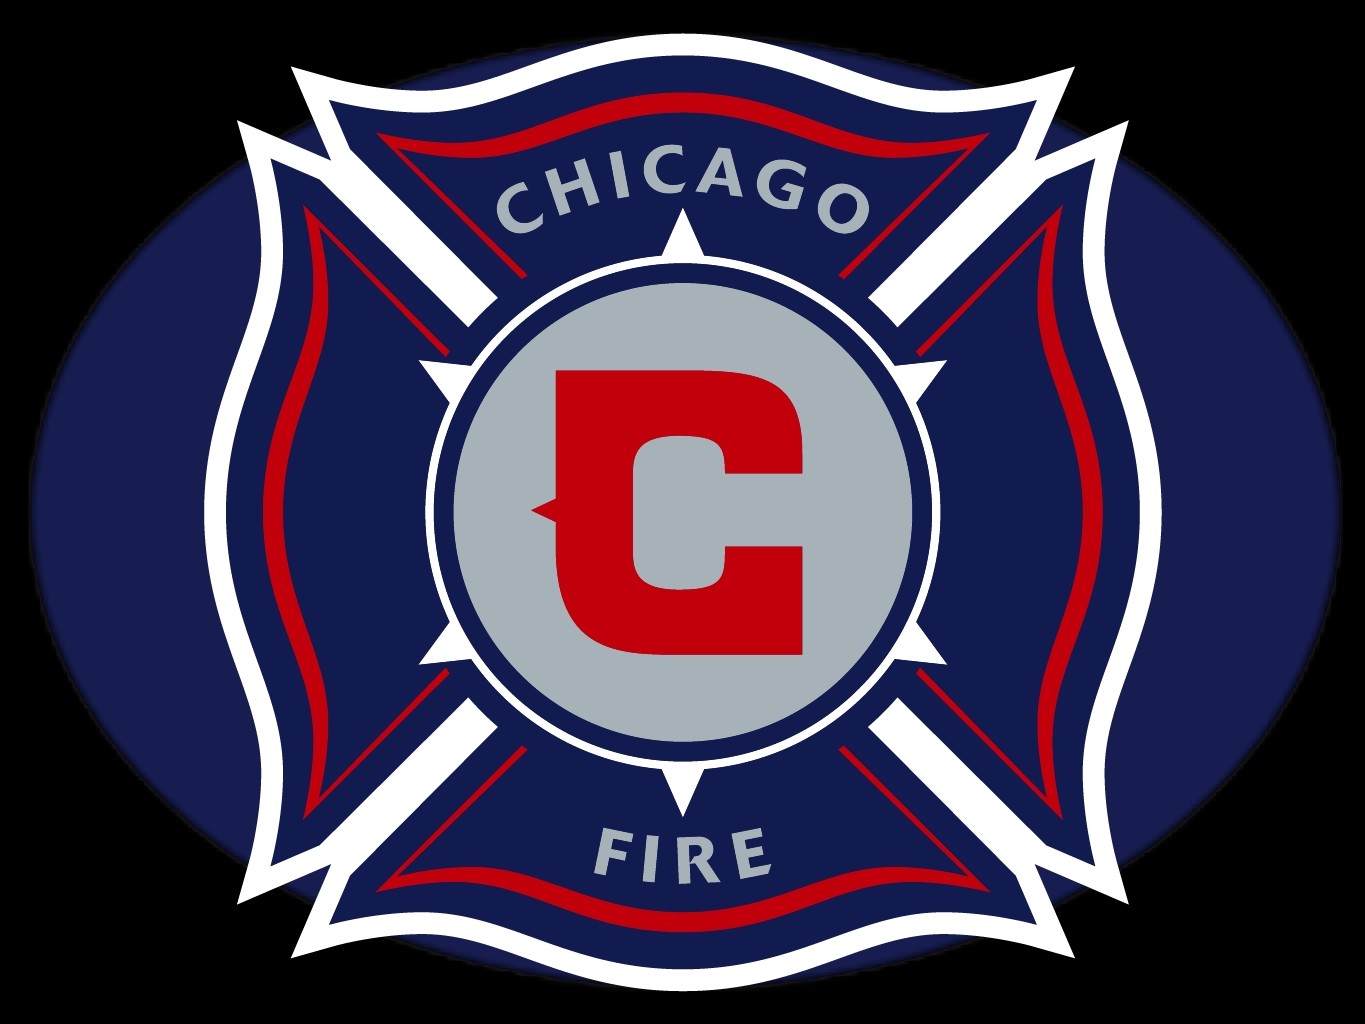 Chicago Fire Soccer Club Background HQ Wallpaper 